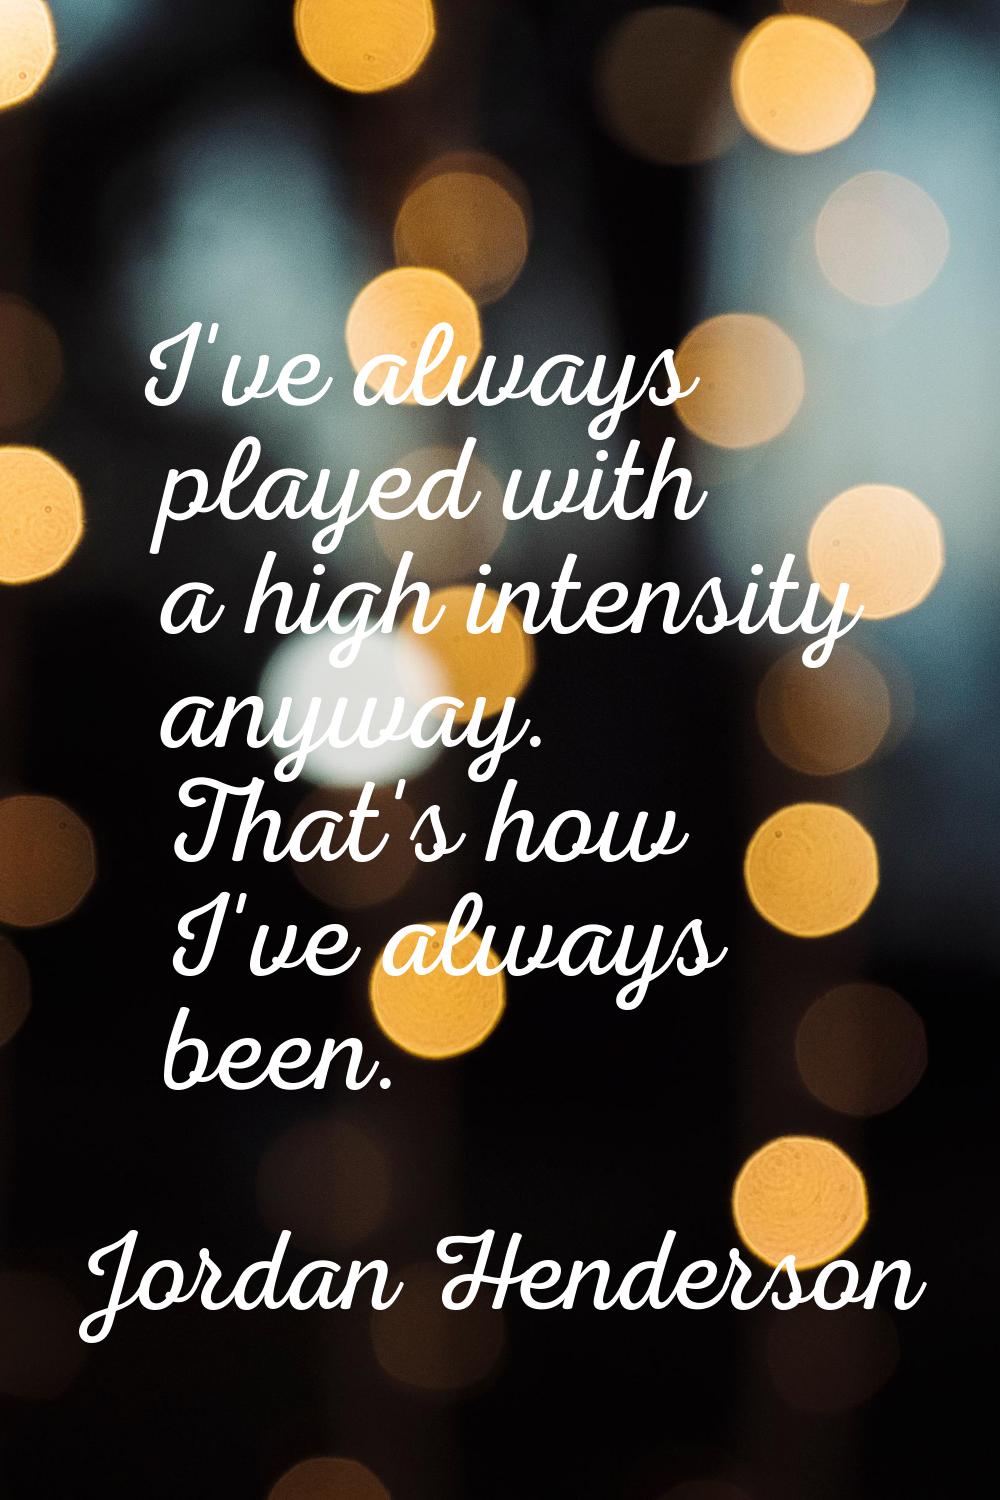 I've always played with a high intensity anyway. That's how I've always been.